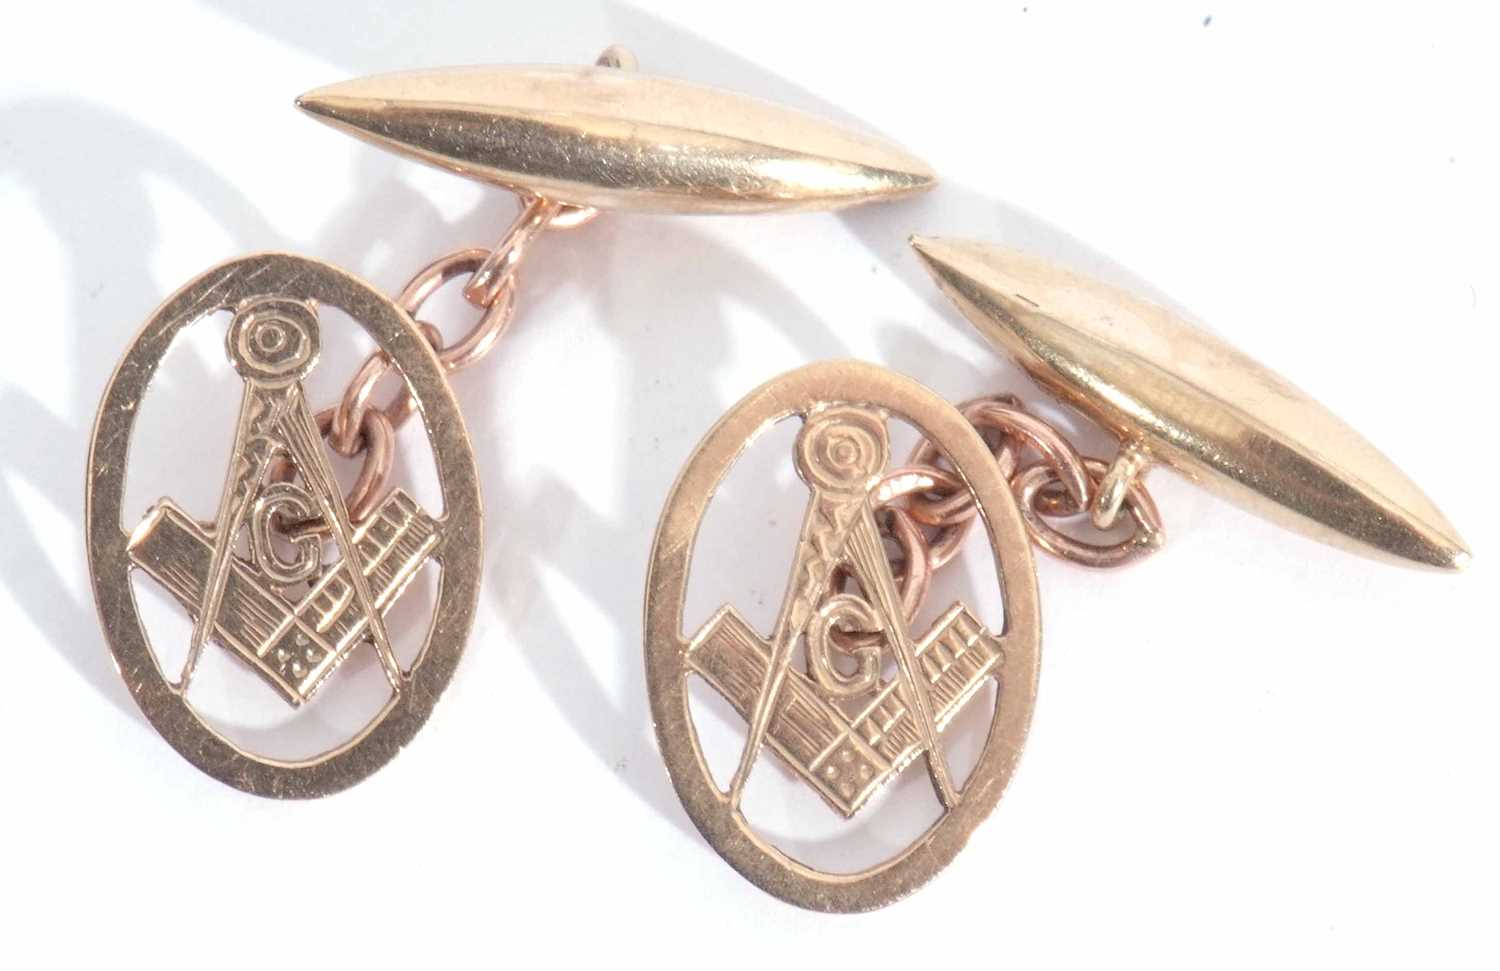 Pair of 9ct gold Masonic cuff links, the oval pierced plaques with ruler and divider symbol, chain - Image 3 of 3